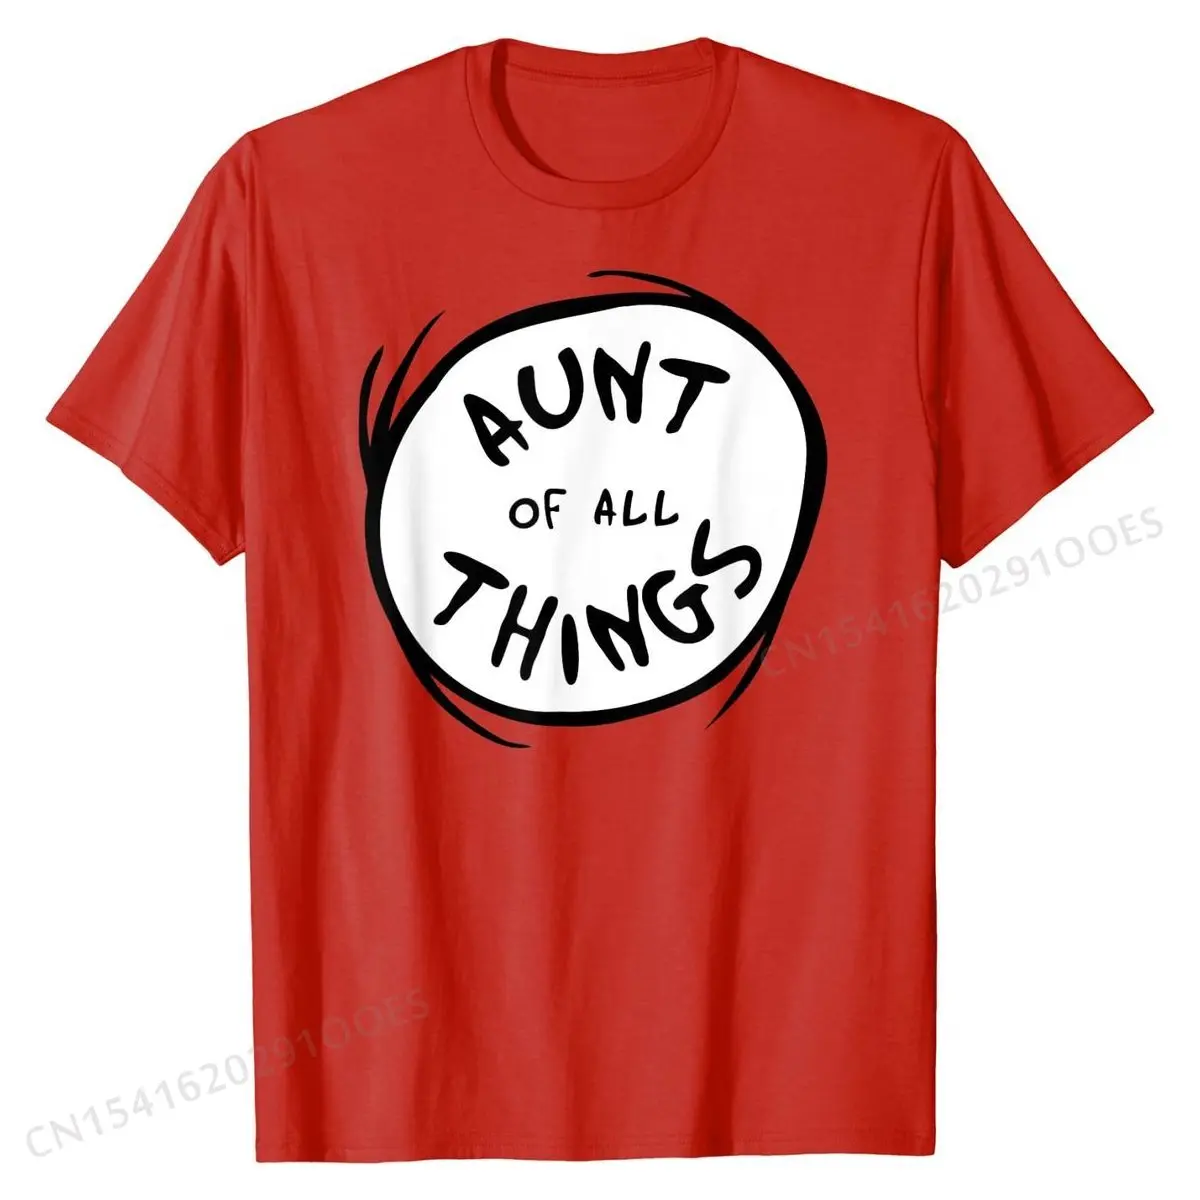 Aunt of all Things Emblem RED T-shirt Rife Men Top T-shirts Casual T Shirt Cotton Design